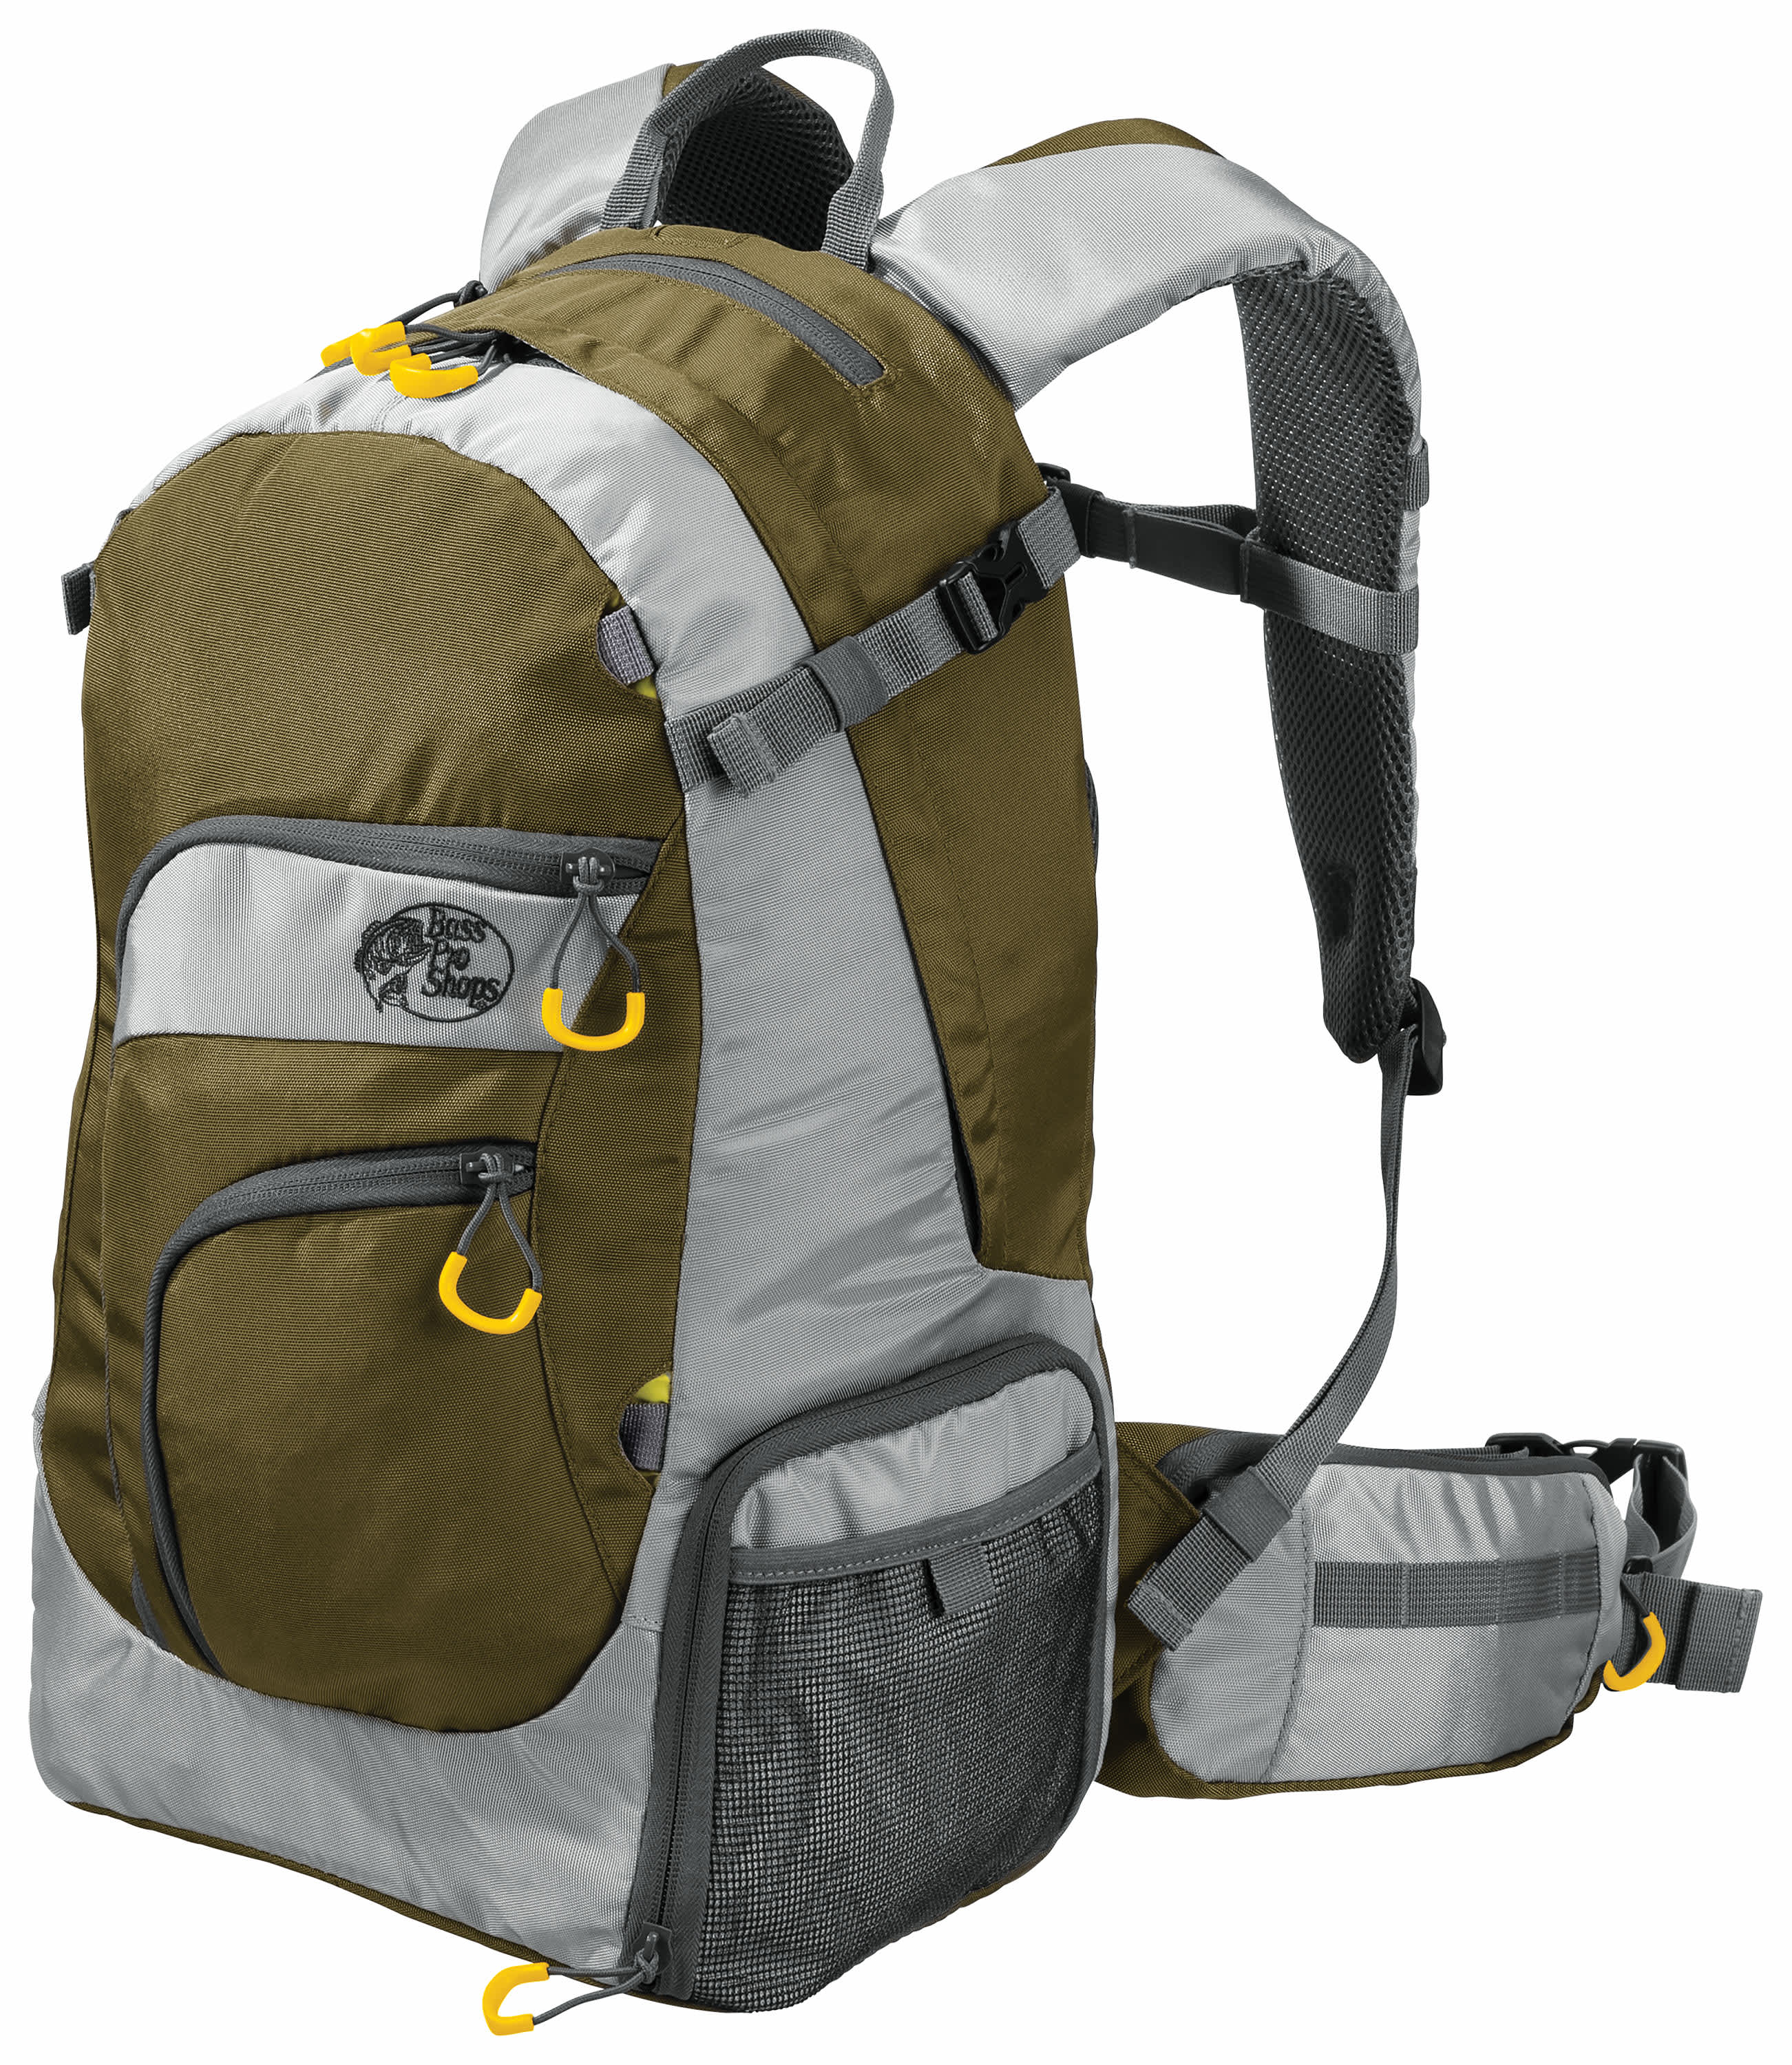 13 Best fishing backpack ideas  fishing backpack, fishing tackle